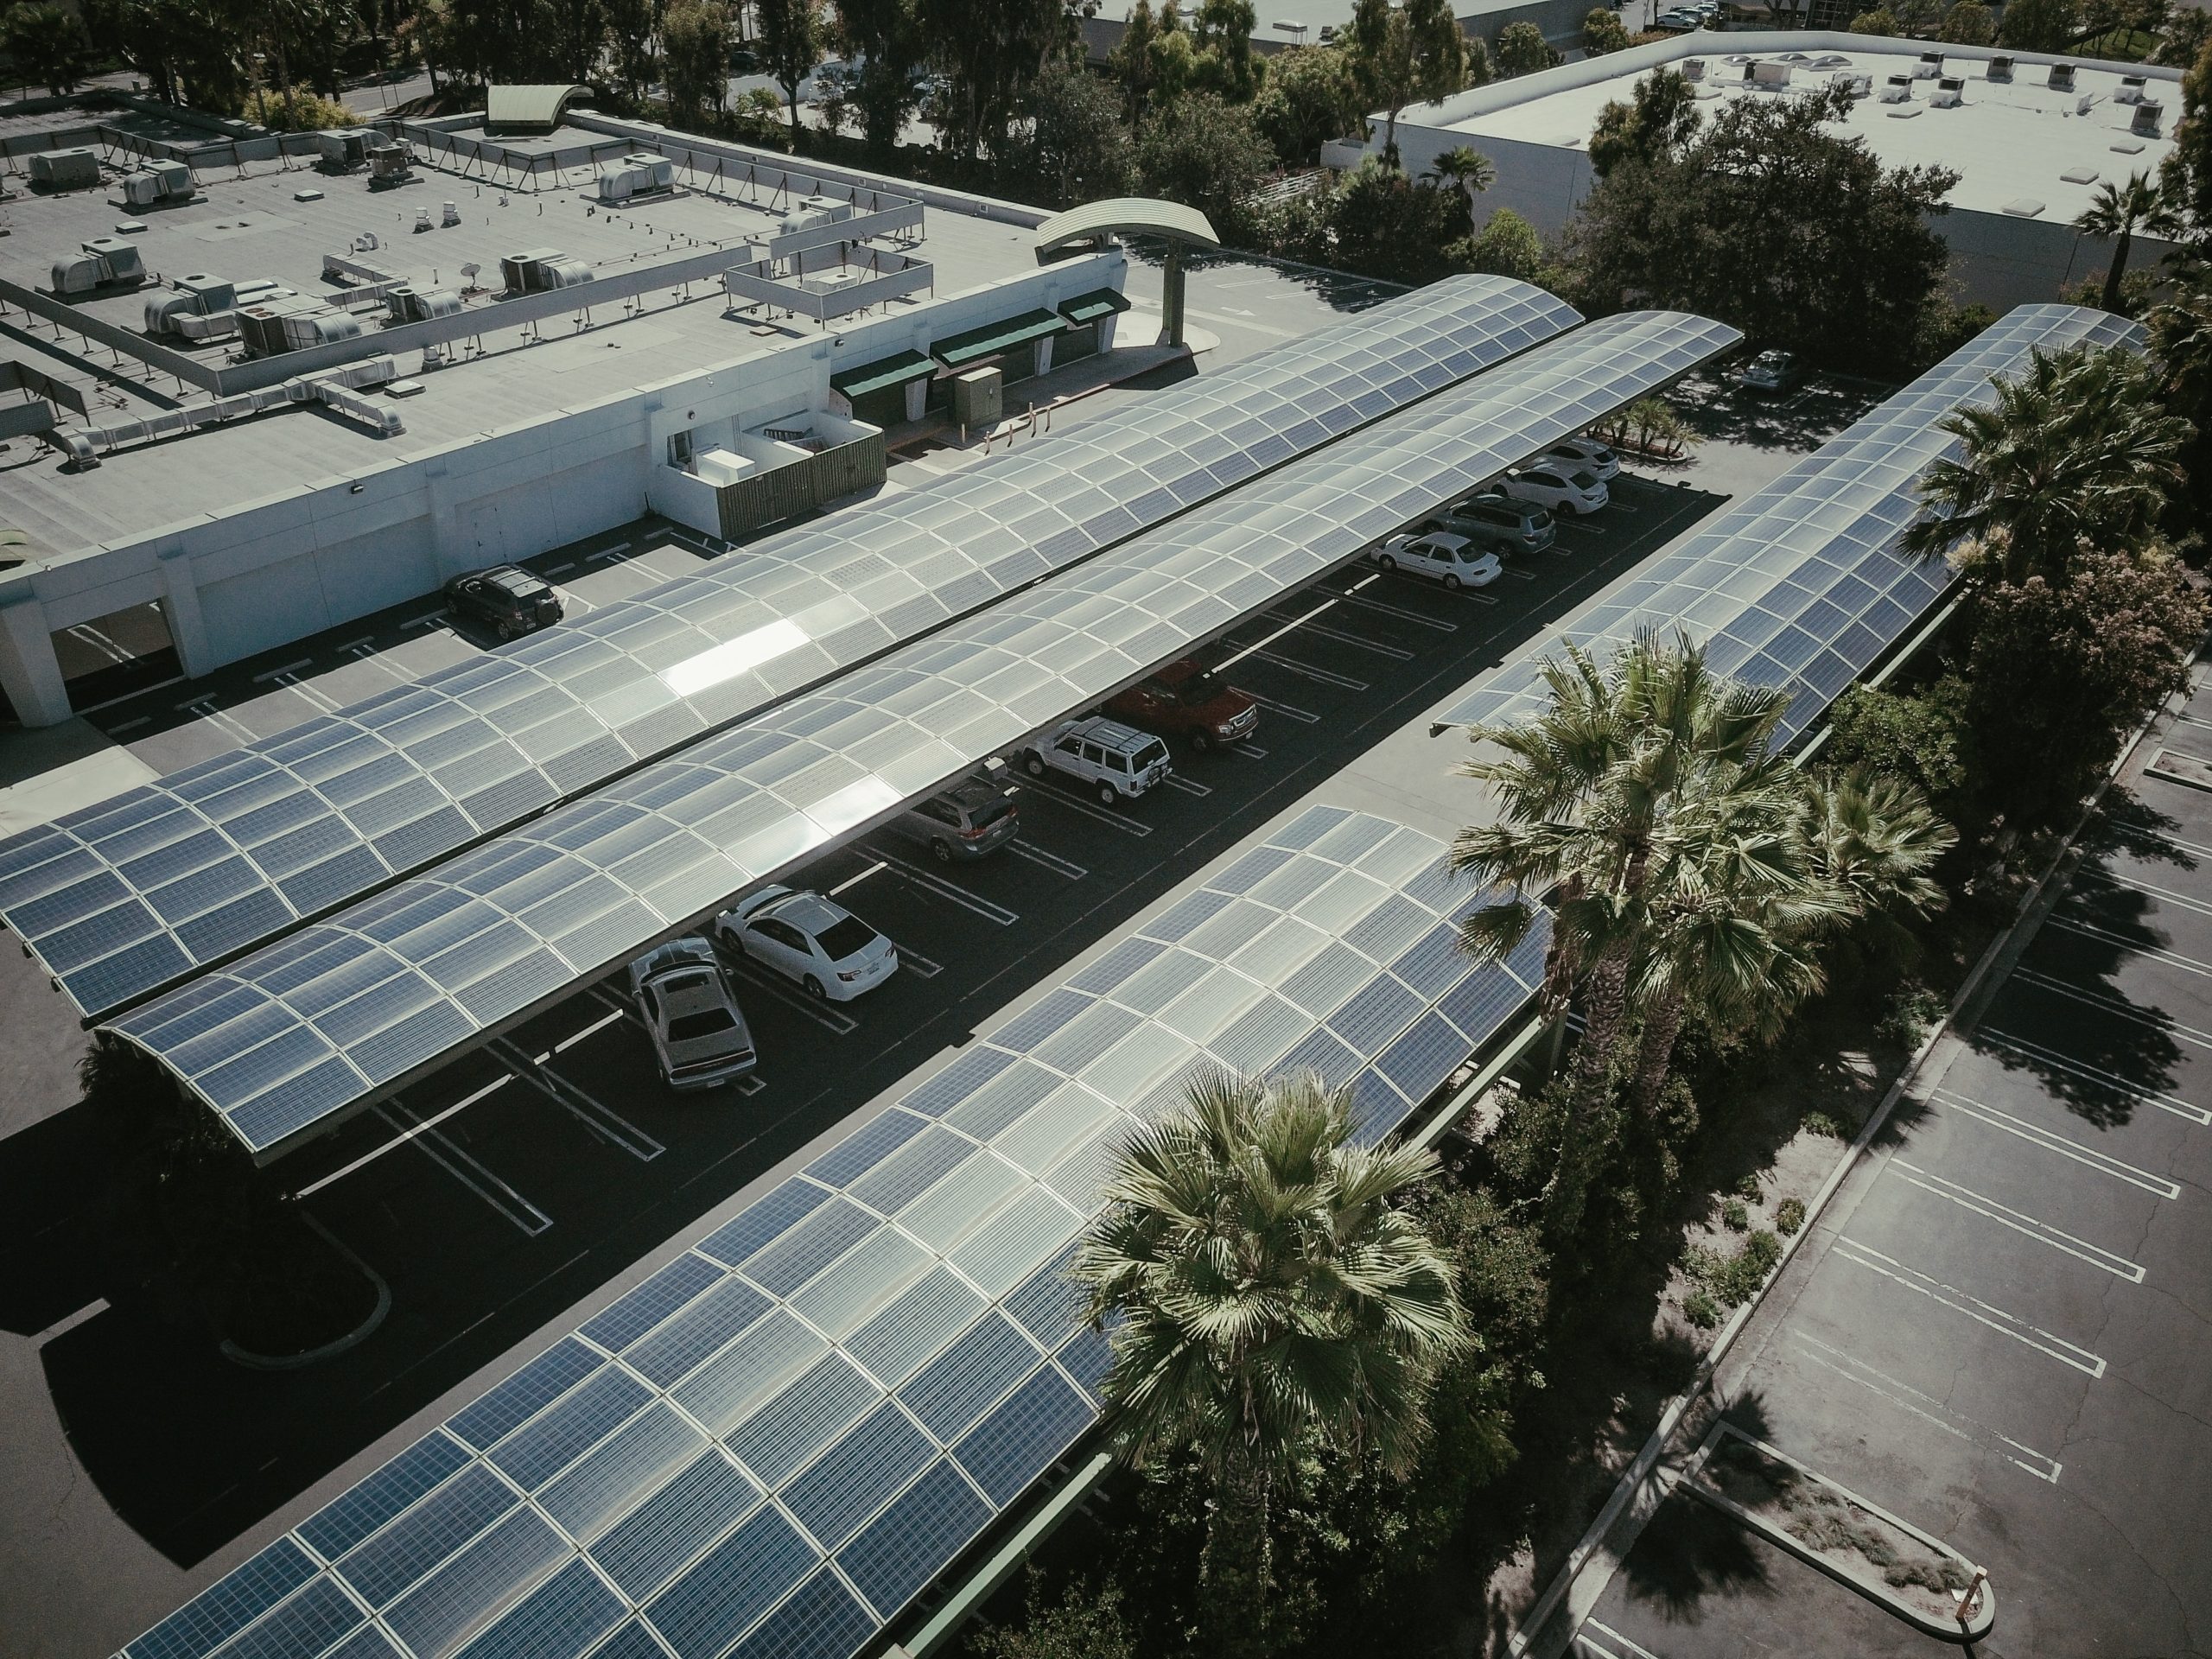 Solar Panels over a parking lot - clean energy